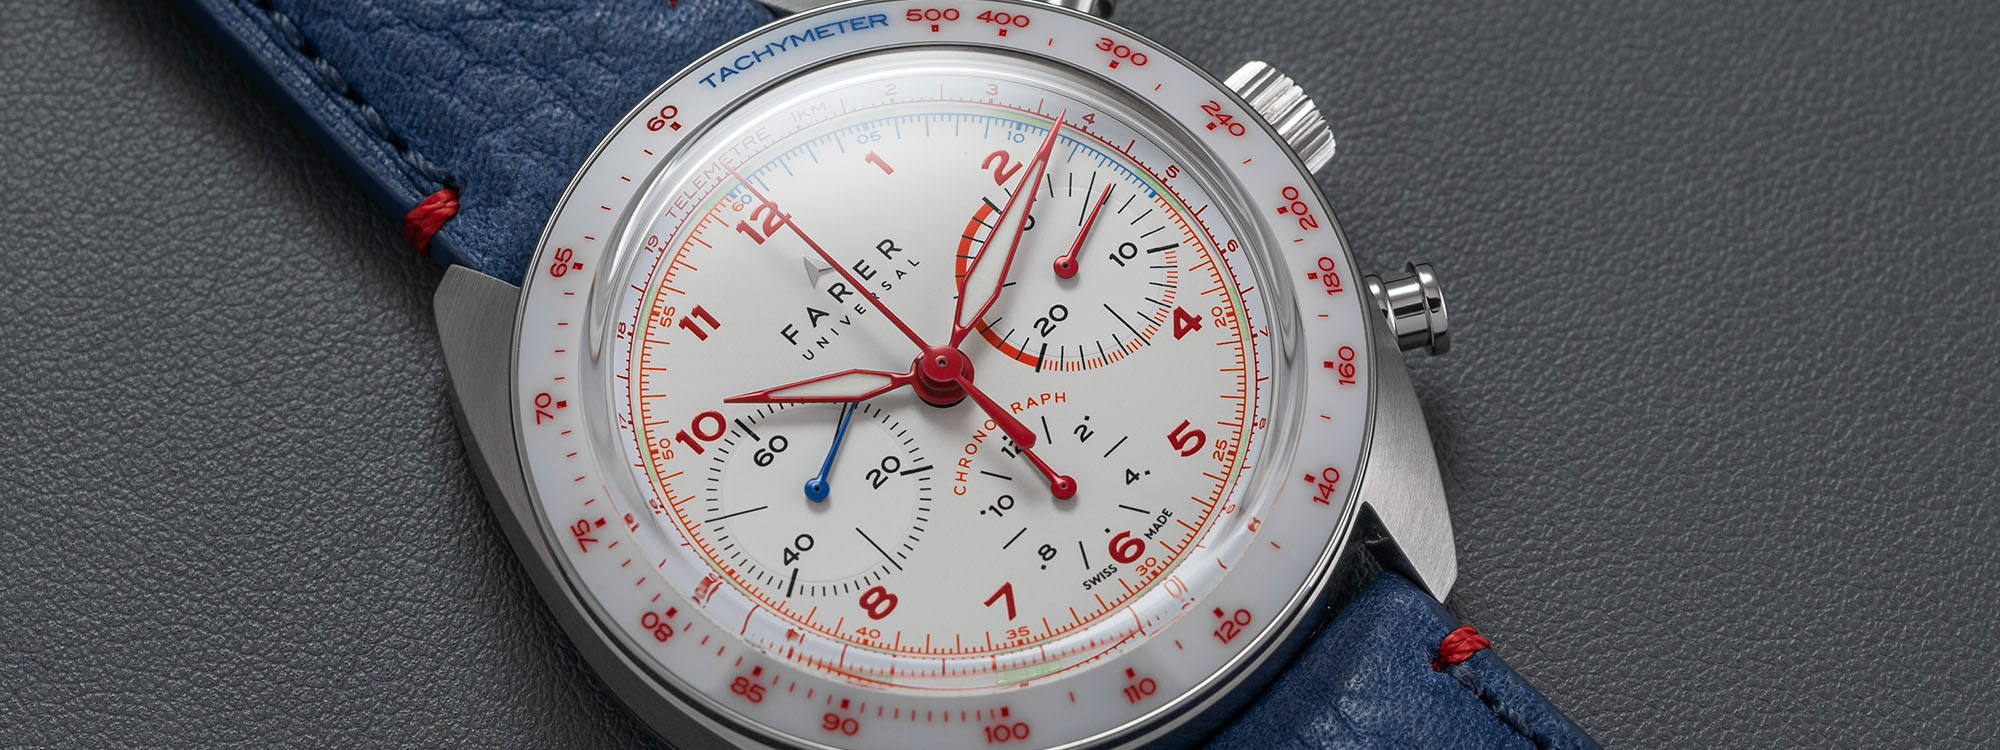 5 Reasons Why You Should Buy A Chronograph Watch - The Watch Company